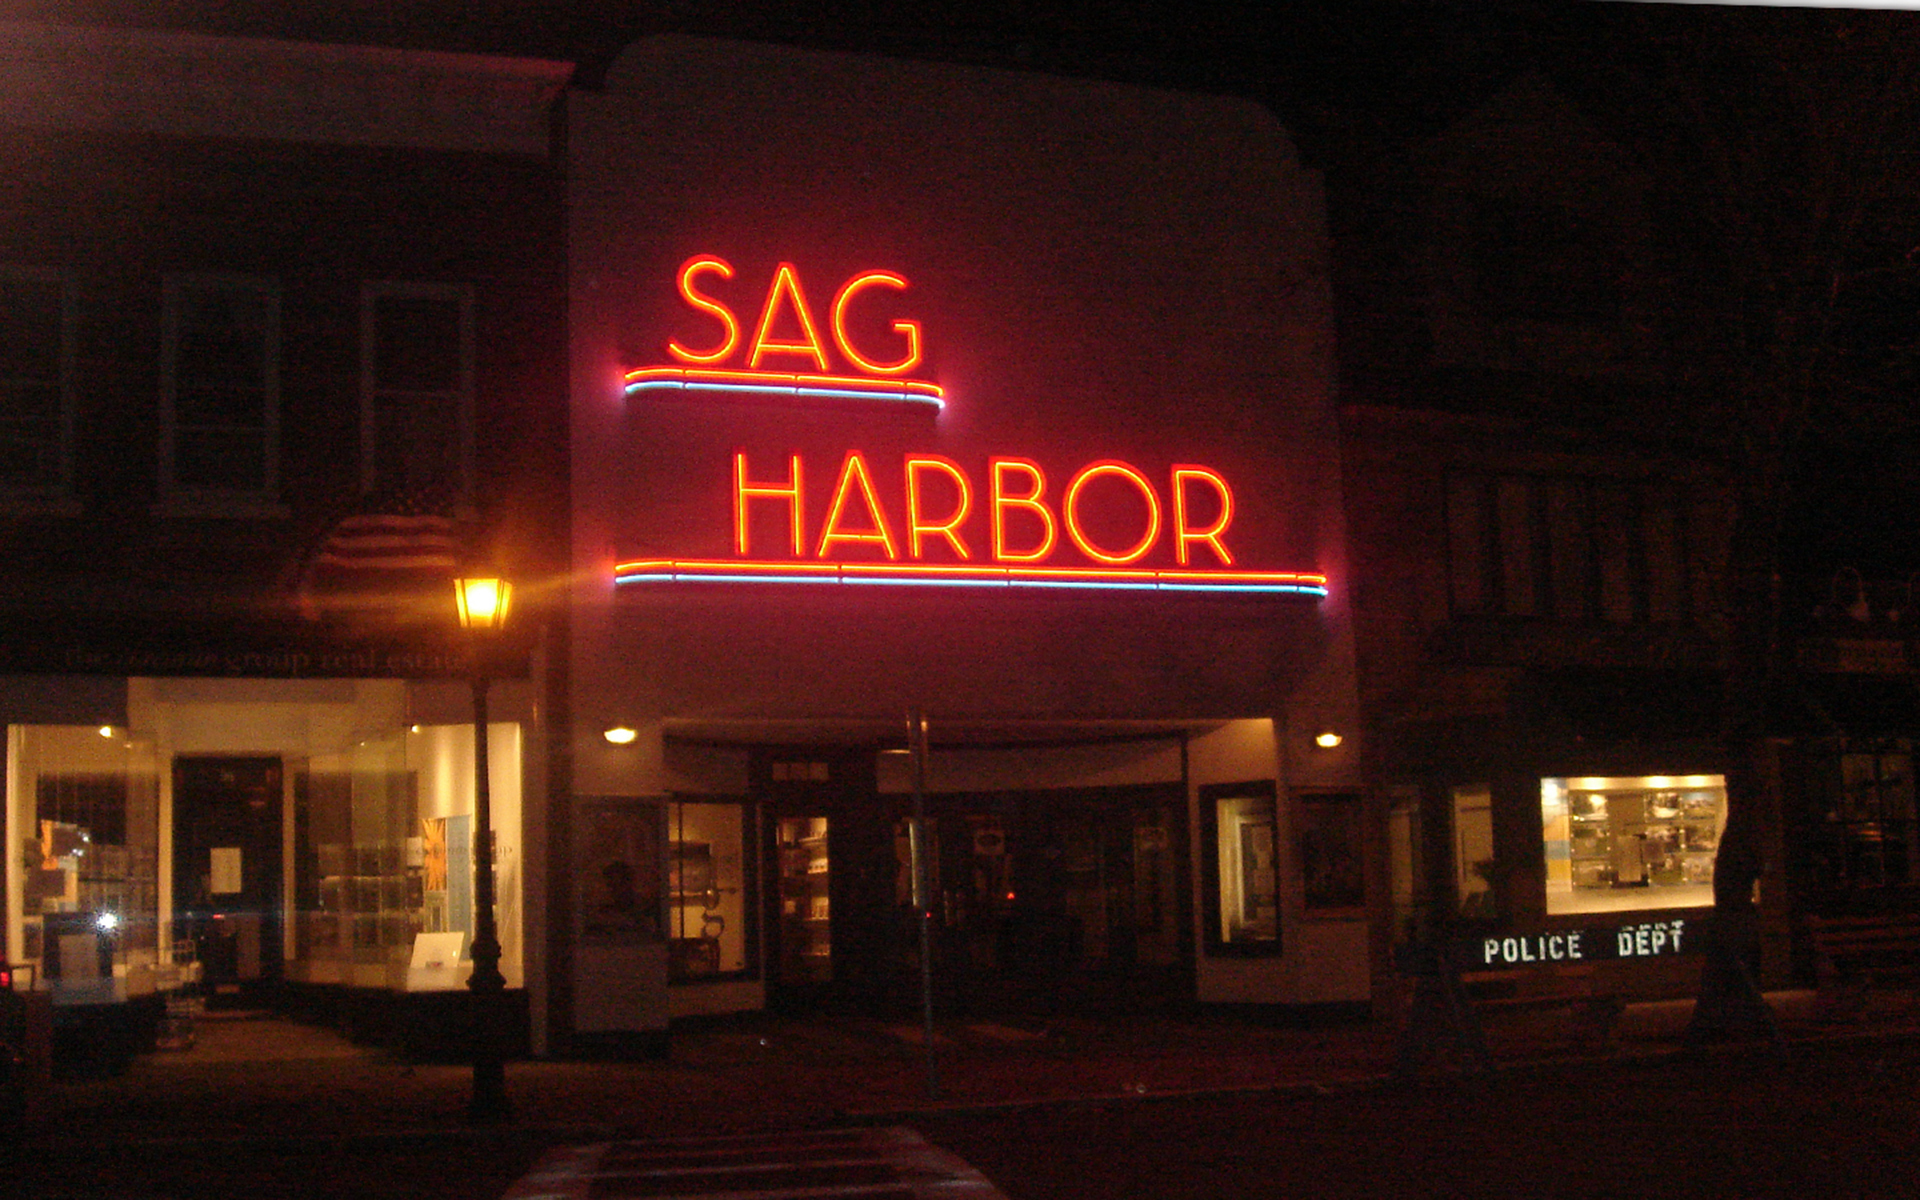 The exterior of the Sag Harbor Cinema,